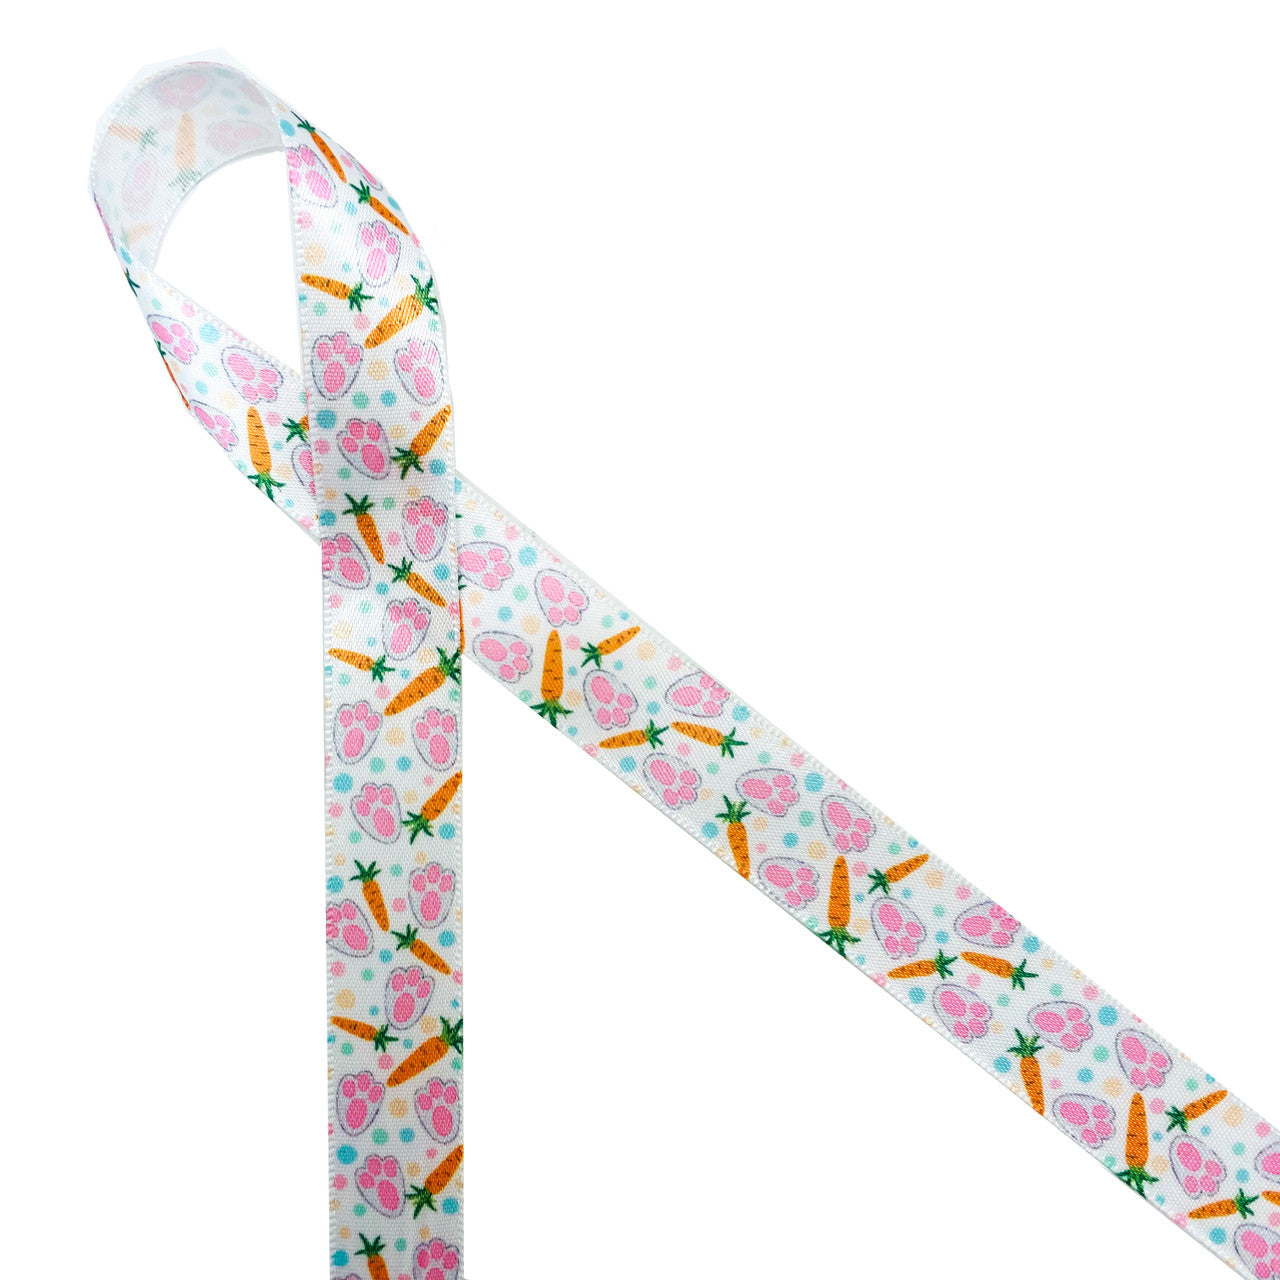 Bunny paw prints and carrots with blue and pink polka dots printed on 5/8" white single face satin ribbon will make the cutest tie ever on your Spring and Easter treats, favors and gifts! Designed and printed in the USA